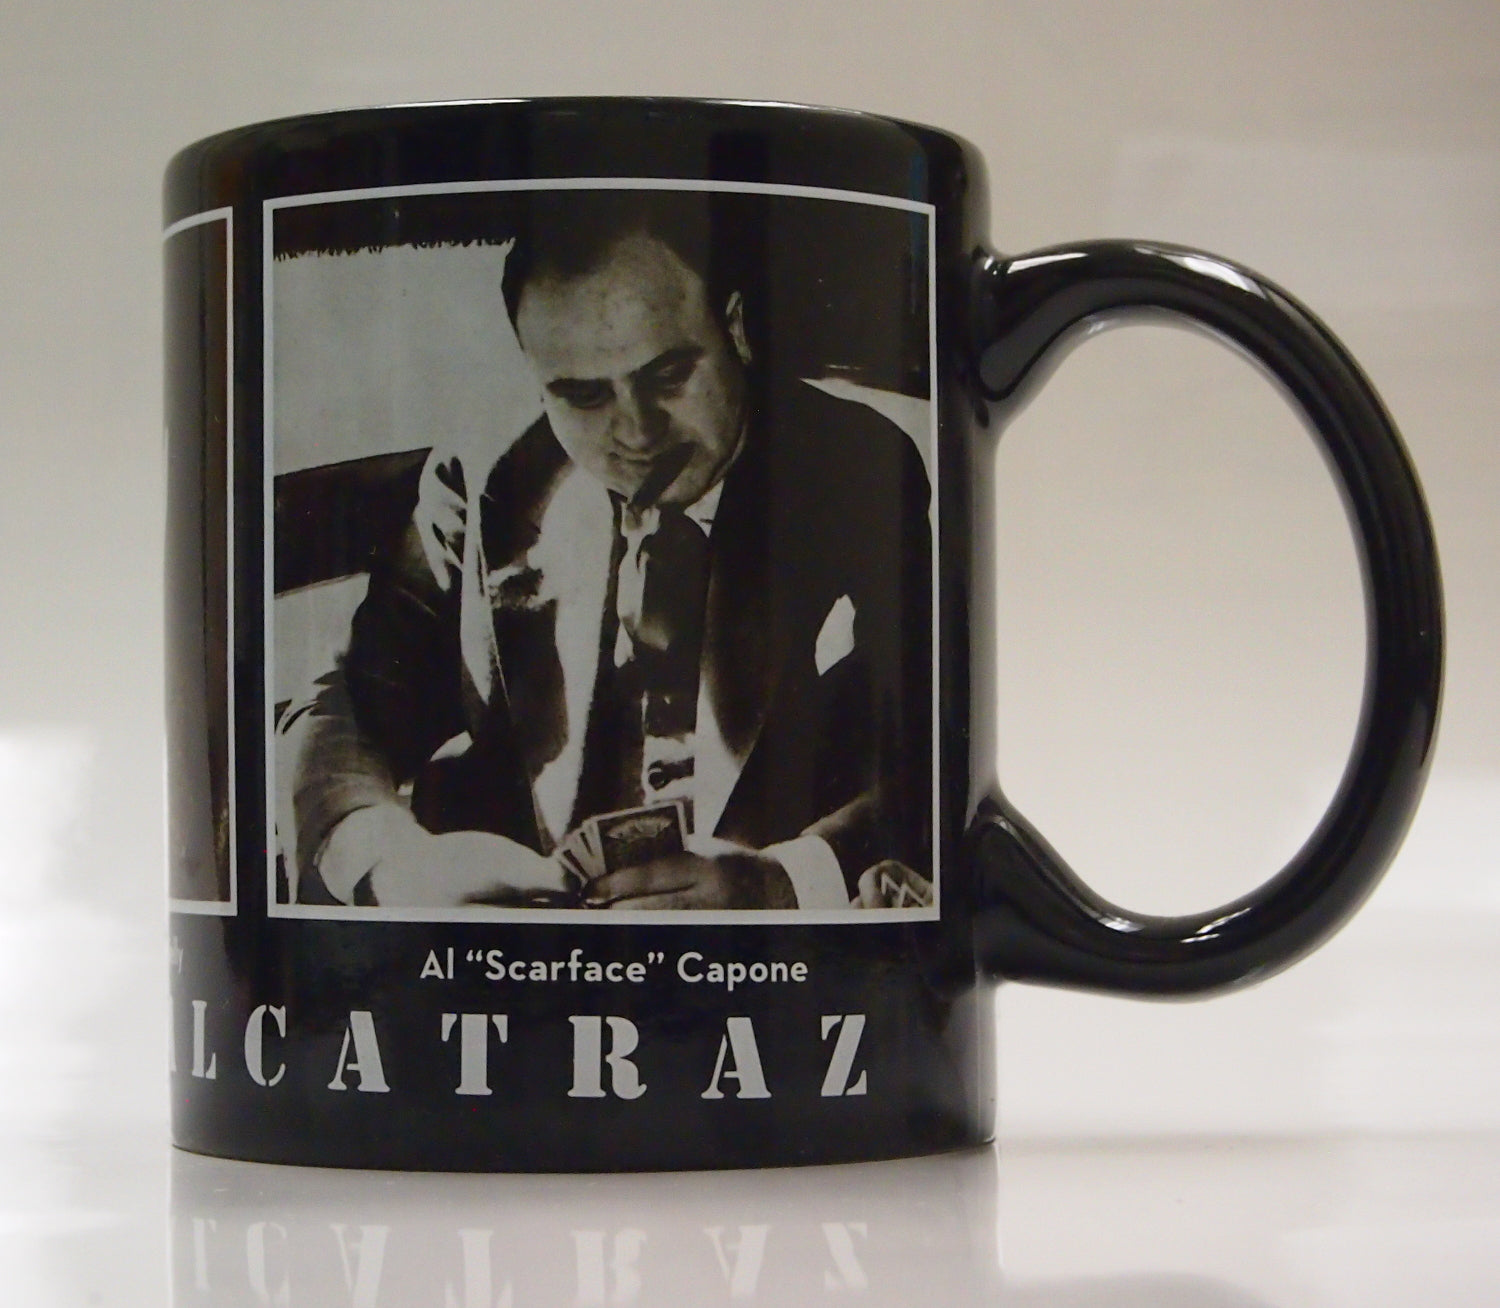 Coffee Mug with a picture of Al "Scarface" Capone